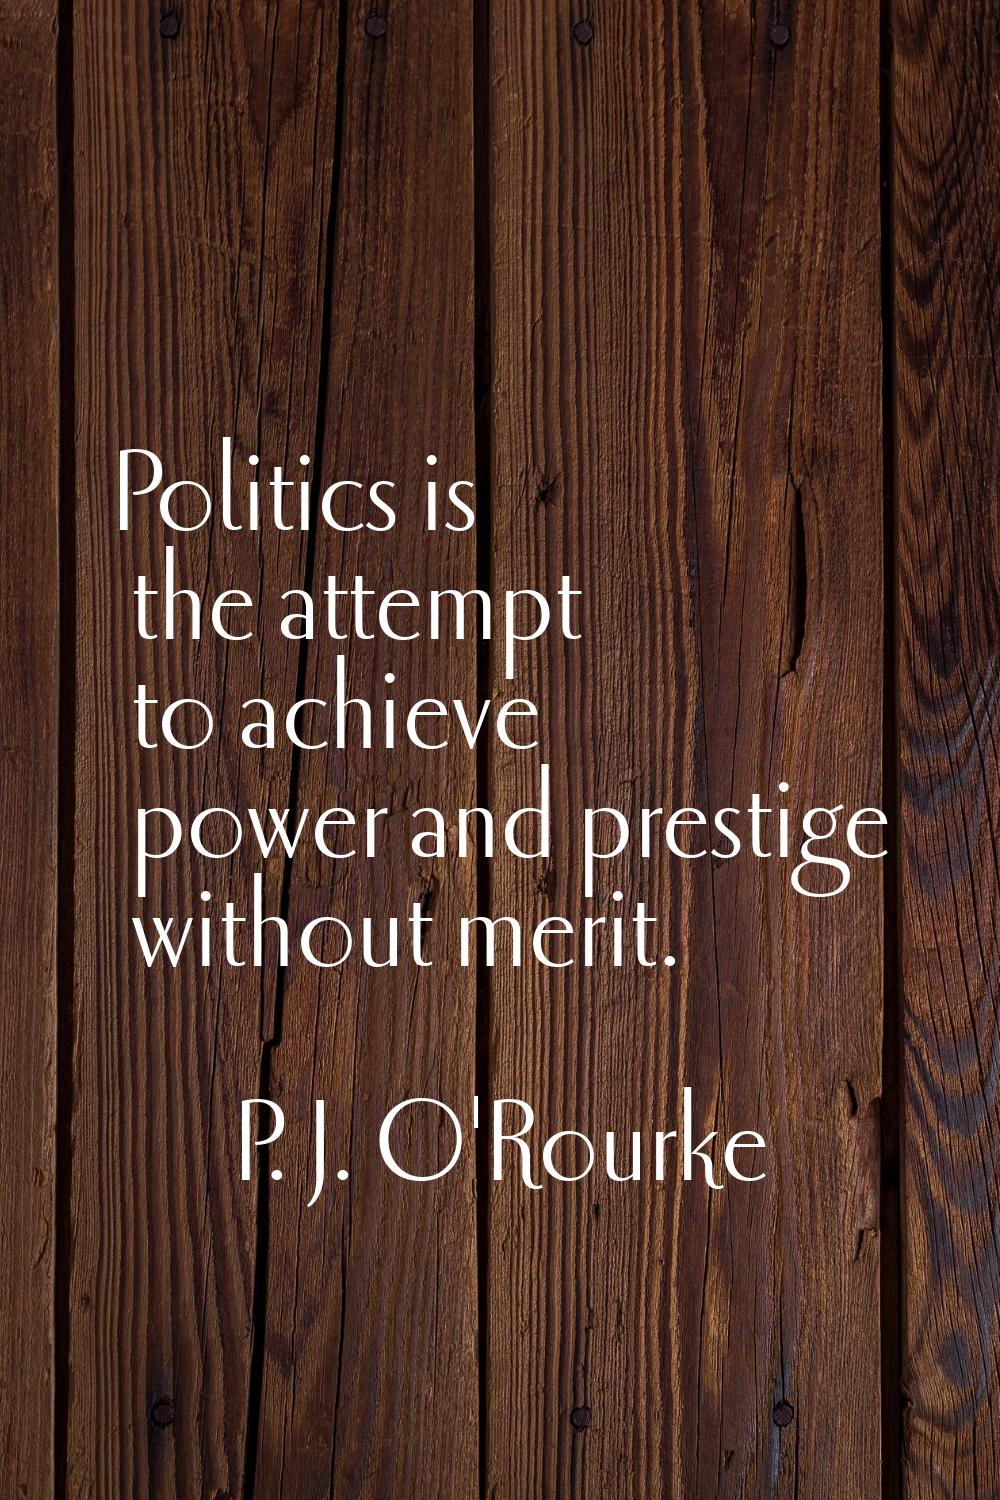 Politics is the attempt to achieve power and prestige without merit.